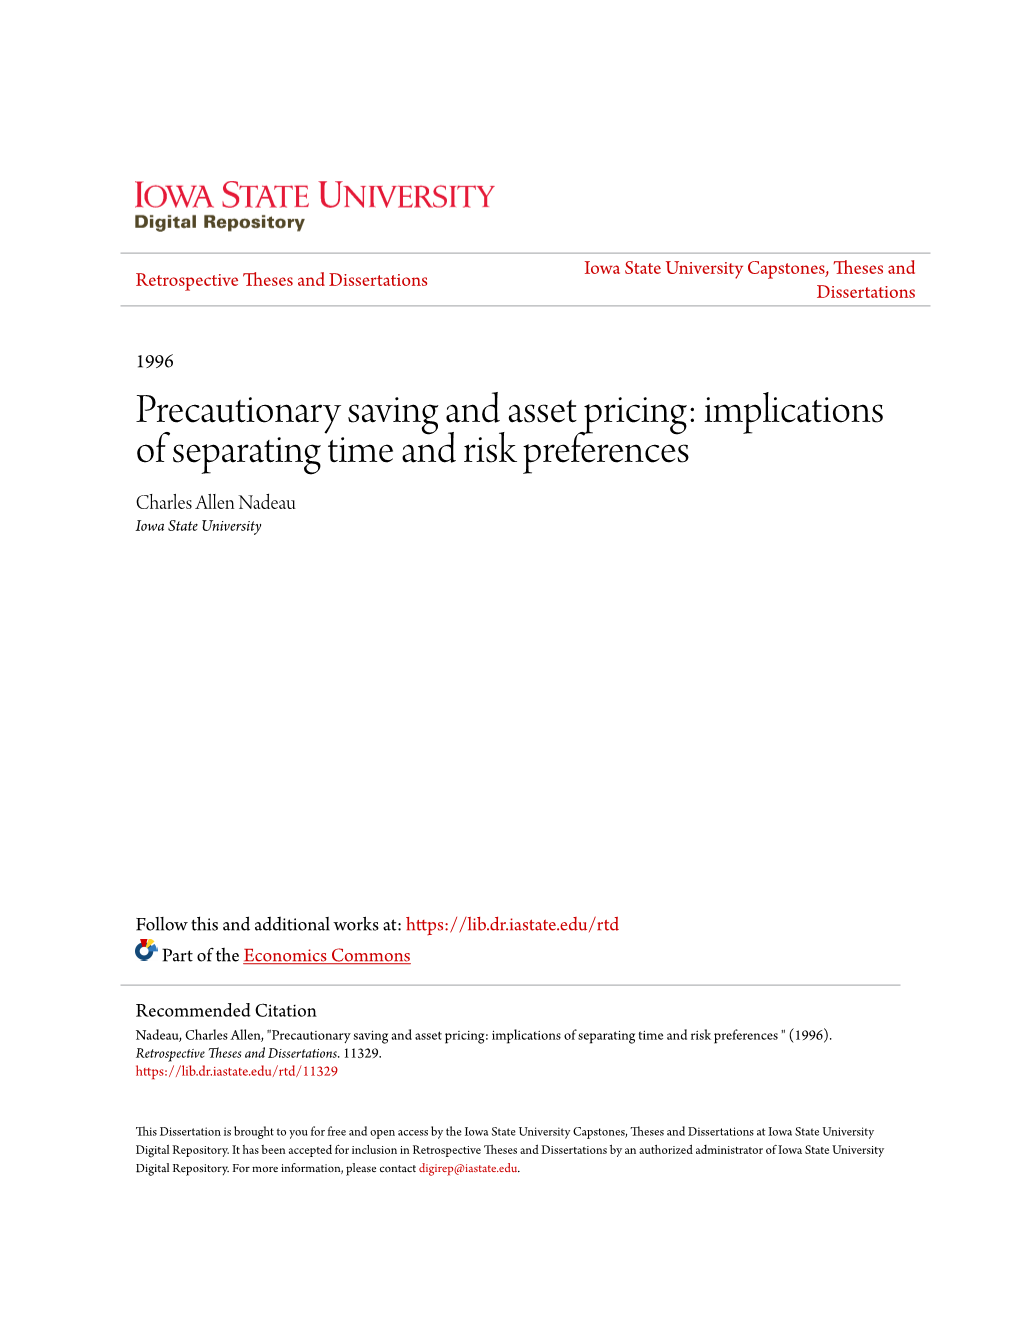 Precautionary Saving and Asset Pricing: Implications of Separating Time and Risk Preferences Charles Allen Nadeau Iowa State University